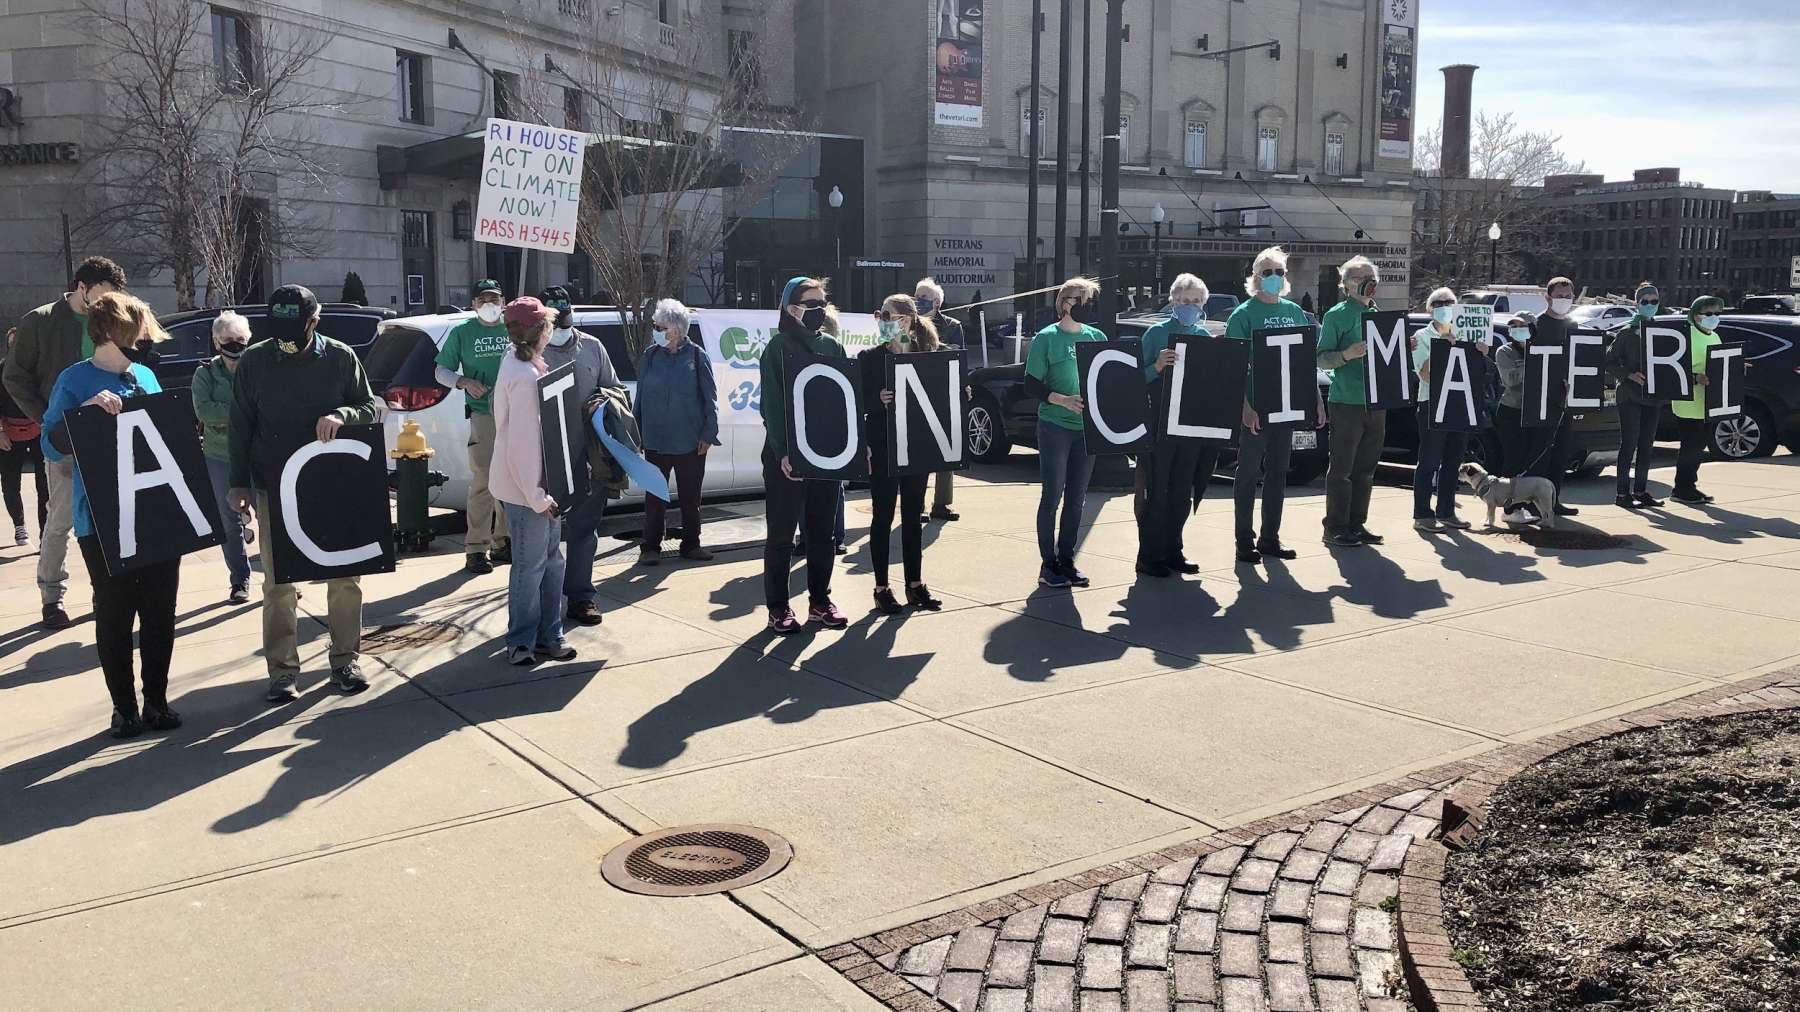 It took four hours, but Act on Climate RI passed the RI House